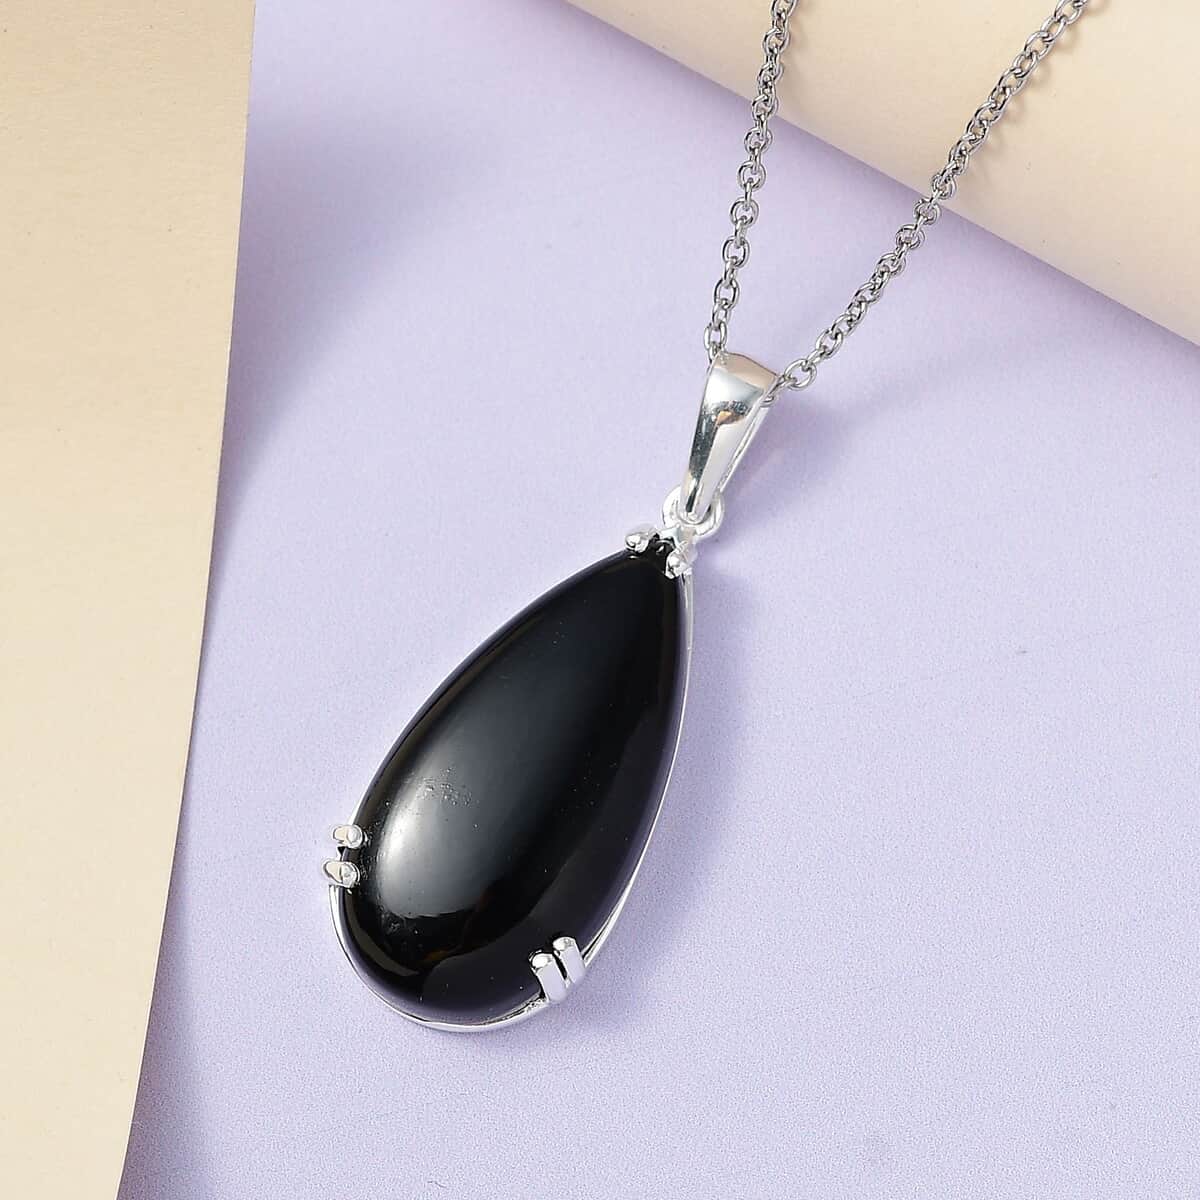 Black Onyx Pendant Necklace 20 Inches in Sterling Silver, Black Teardrop Pendant Necklaces for Women, Silver Boho Pendant - December Birthstone Necklace with Stainless Steel Chain 20 Inches 20.00 ctw image number 3